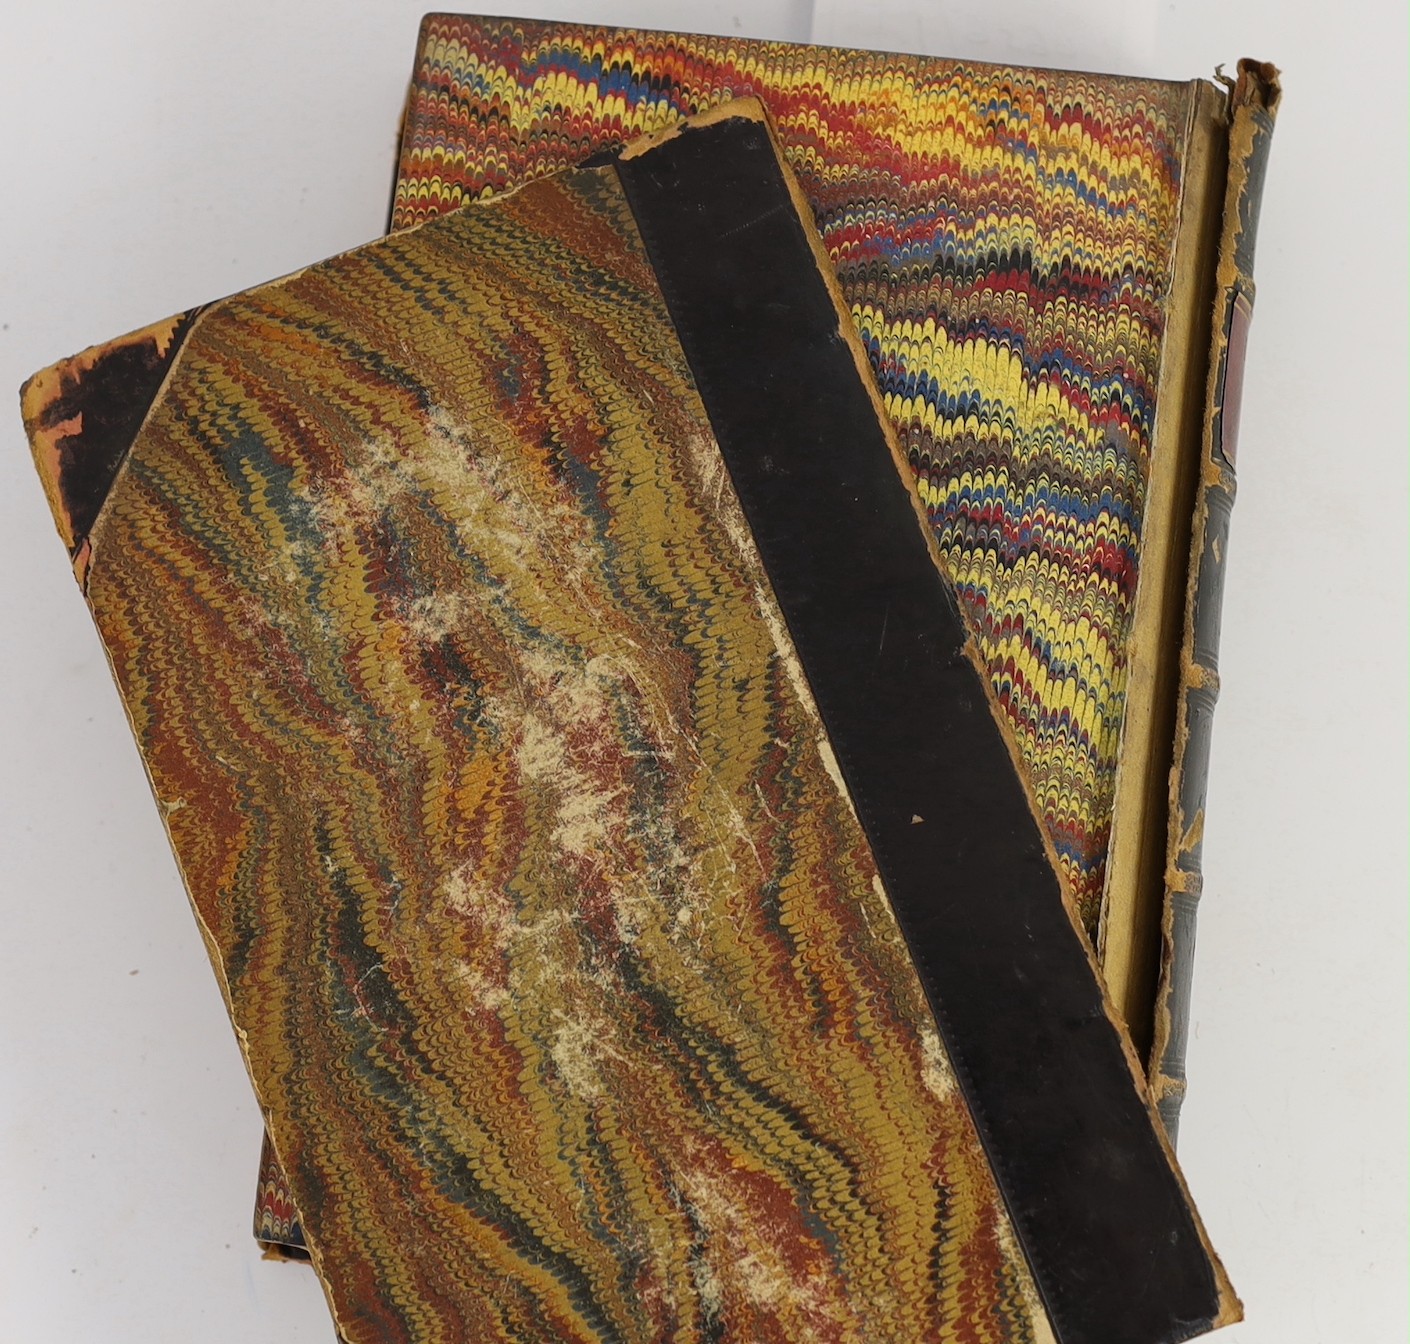 Dickens, Charles - Dealings with the Firm of Dombey and Son. ‘’Dombey and Son’’, 1st edition in book form, with all 1st state errors, 8vo, half calf, with marbled boards, illustrated by Halbot K. Browne (‘’Phiz’’), with